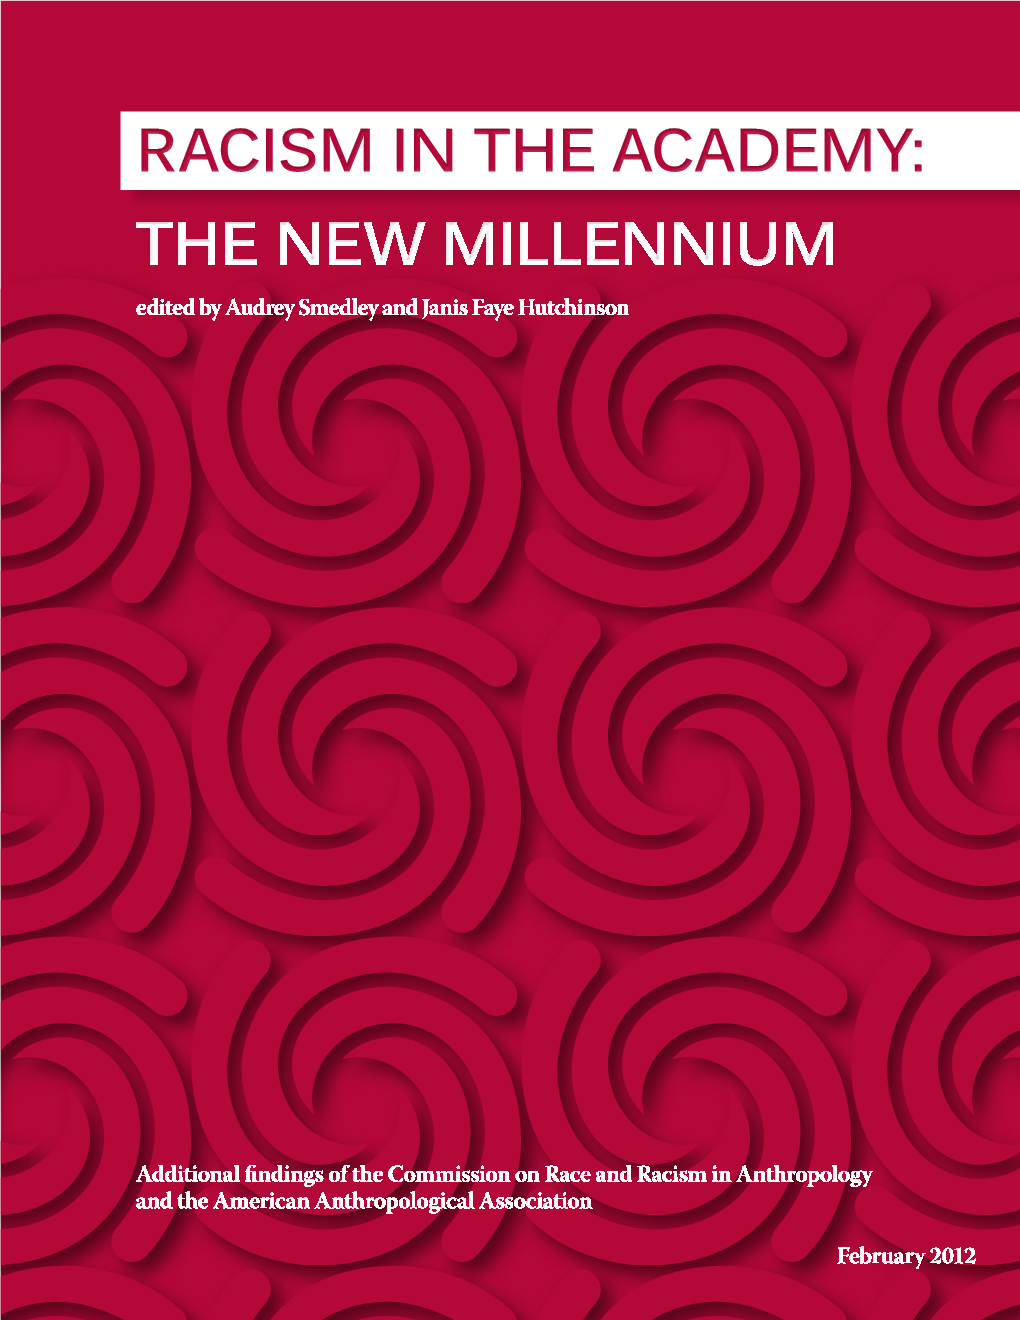 RACISM in the ACADEMY: the New Millennium Edited by Audrey Smedley and Janis Faye Hutchinson